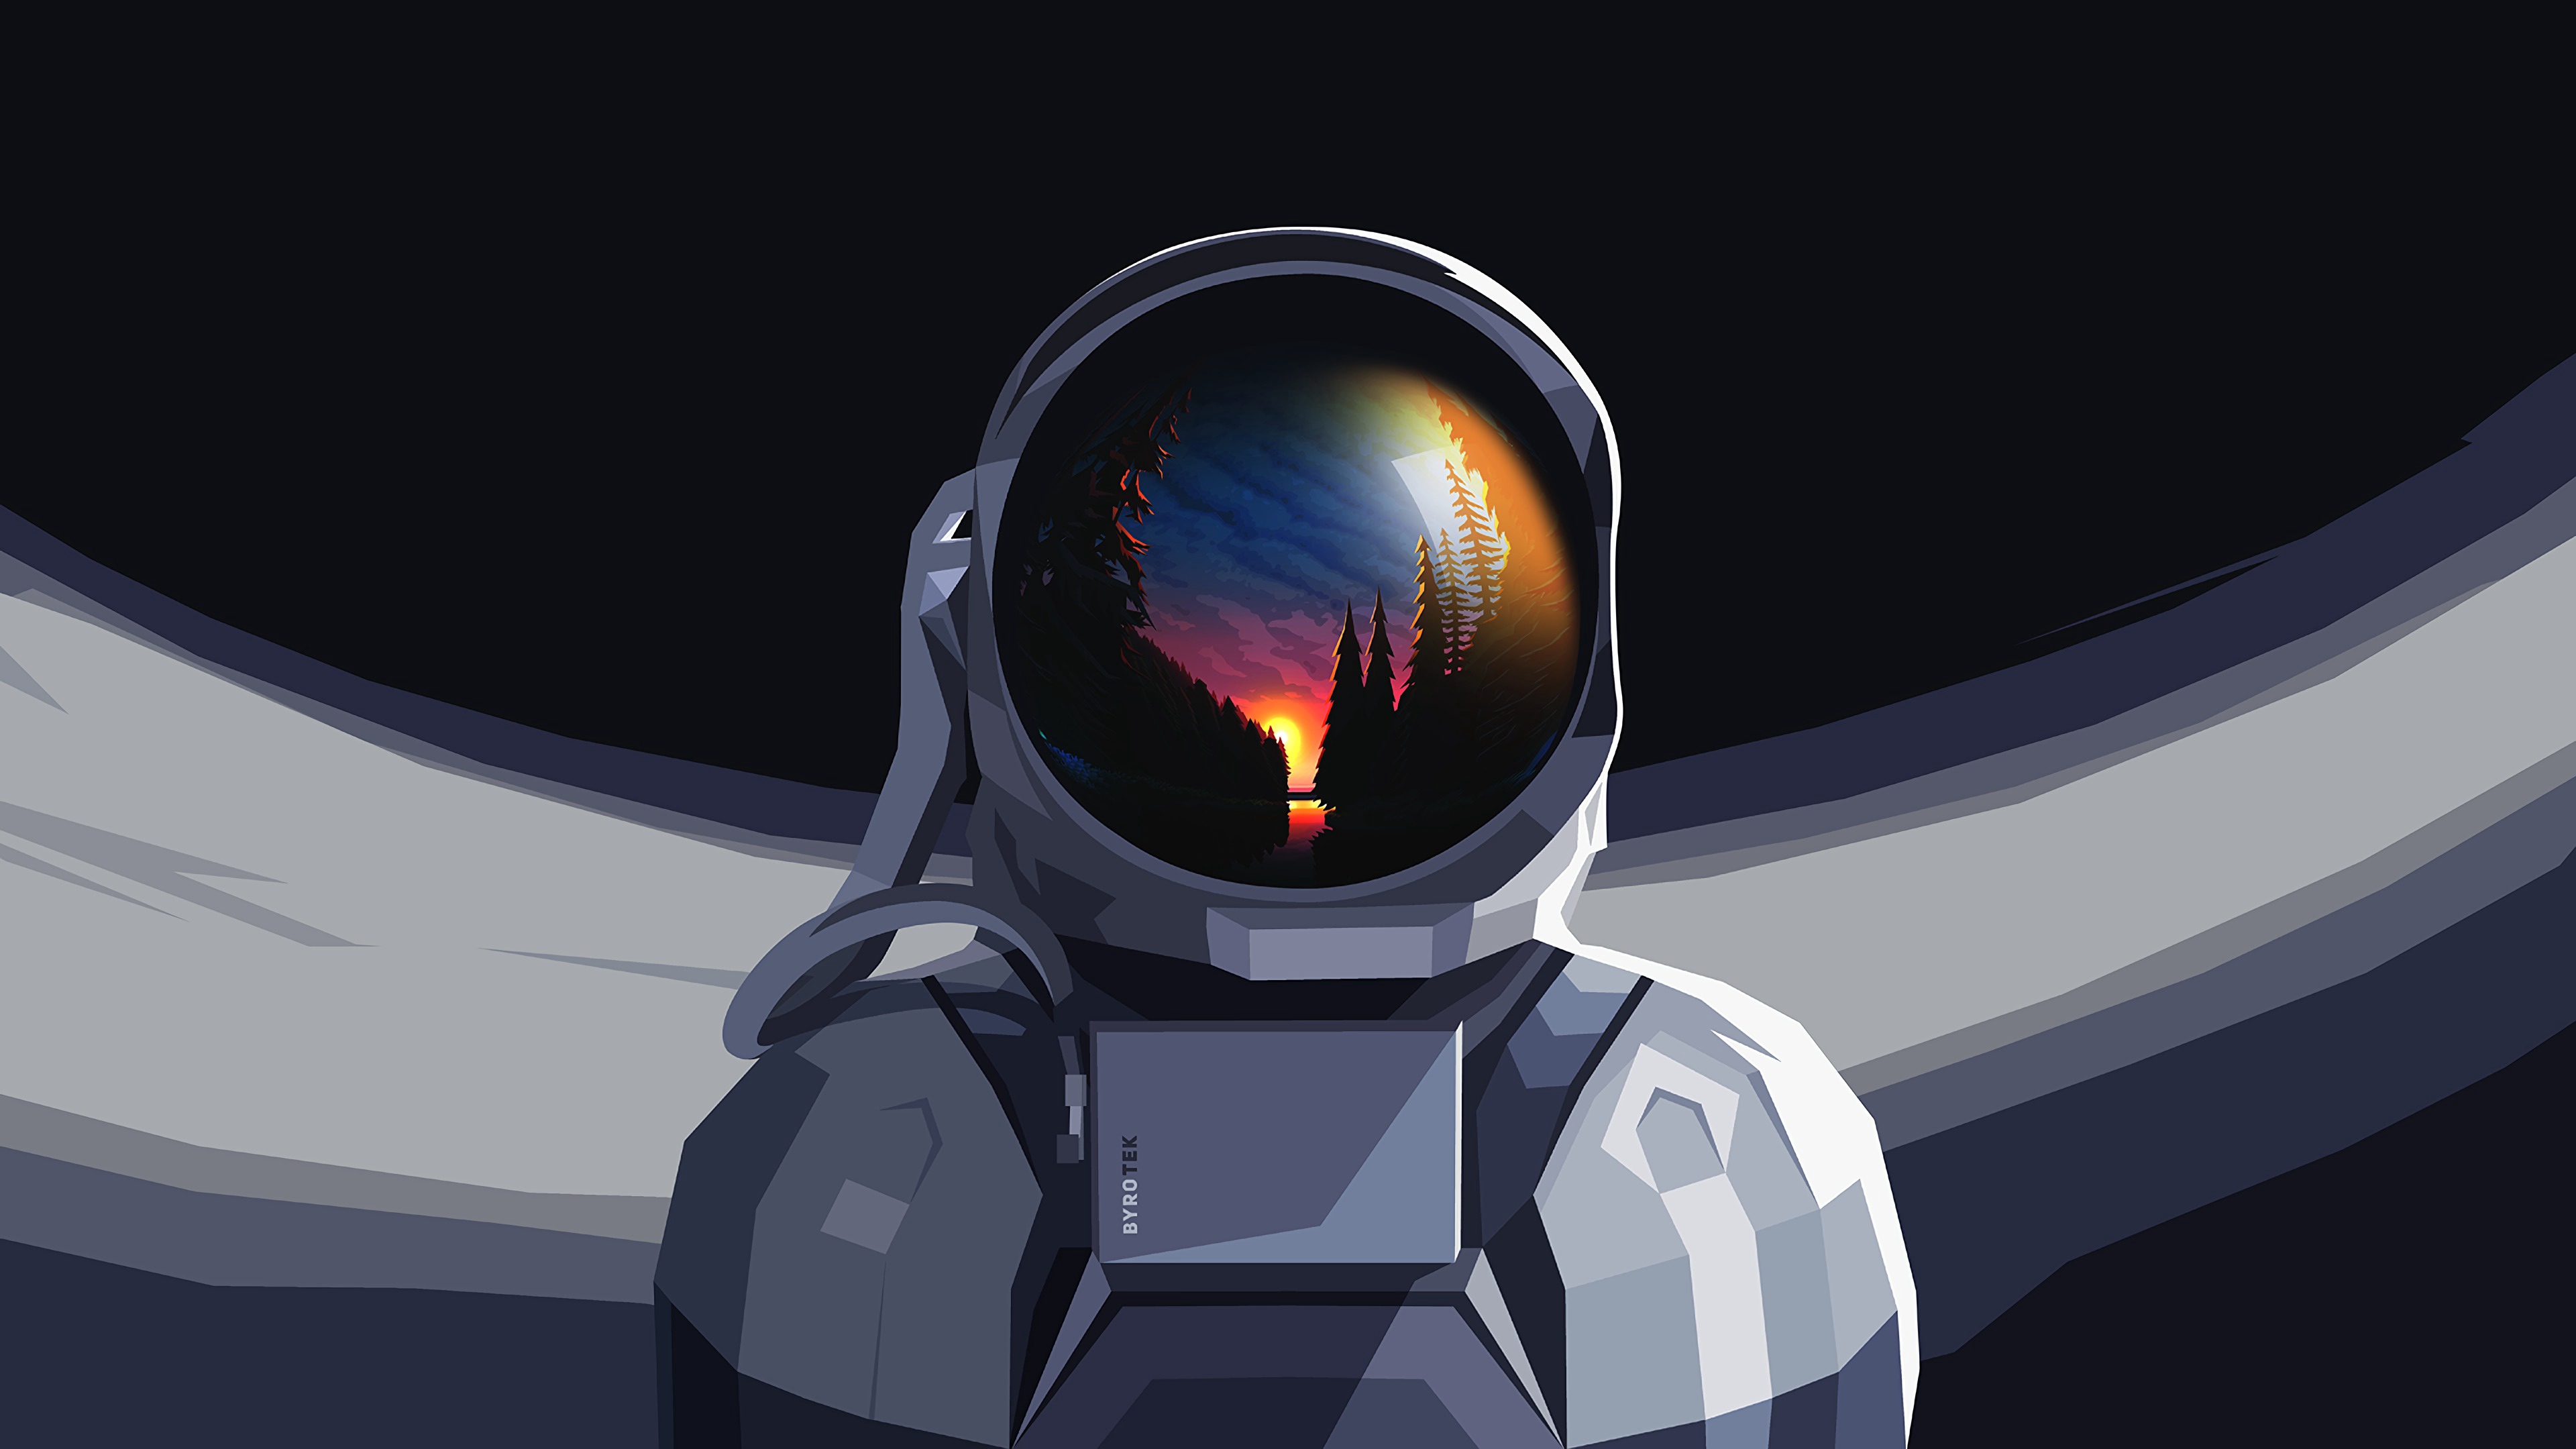 Astronauts 4K wallpapers for your desktop or mobile screen free and